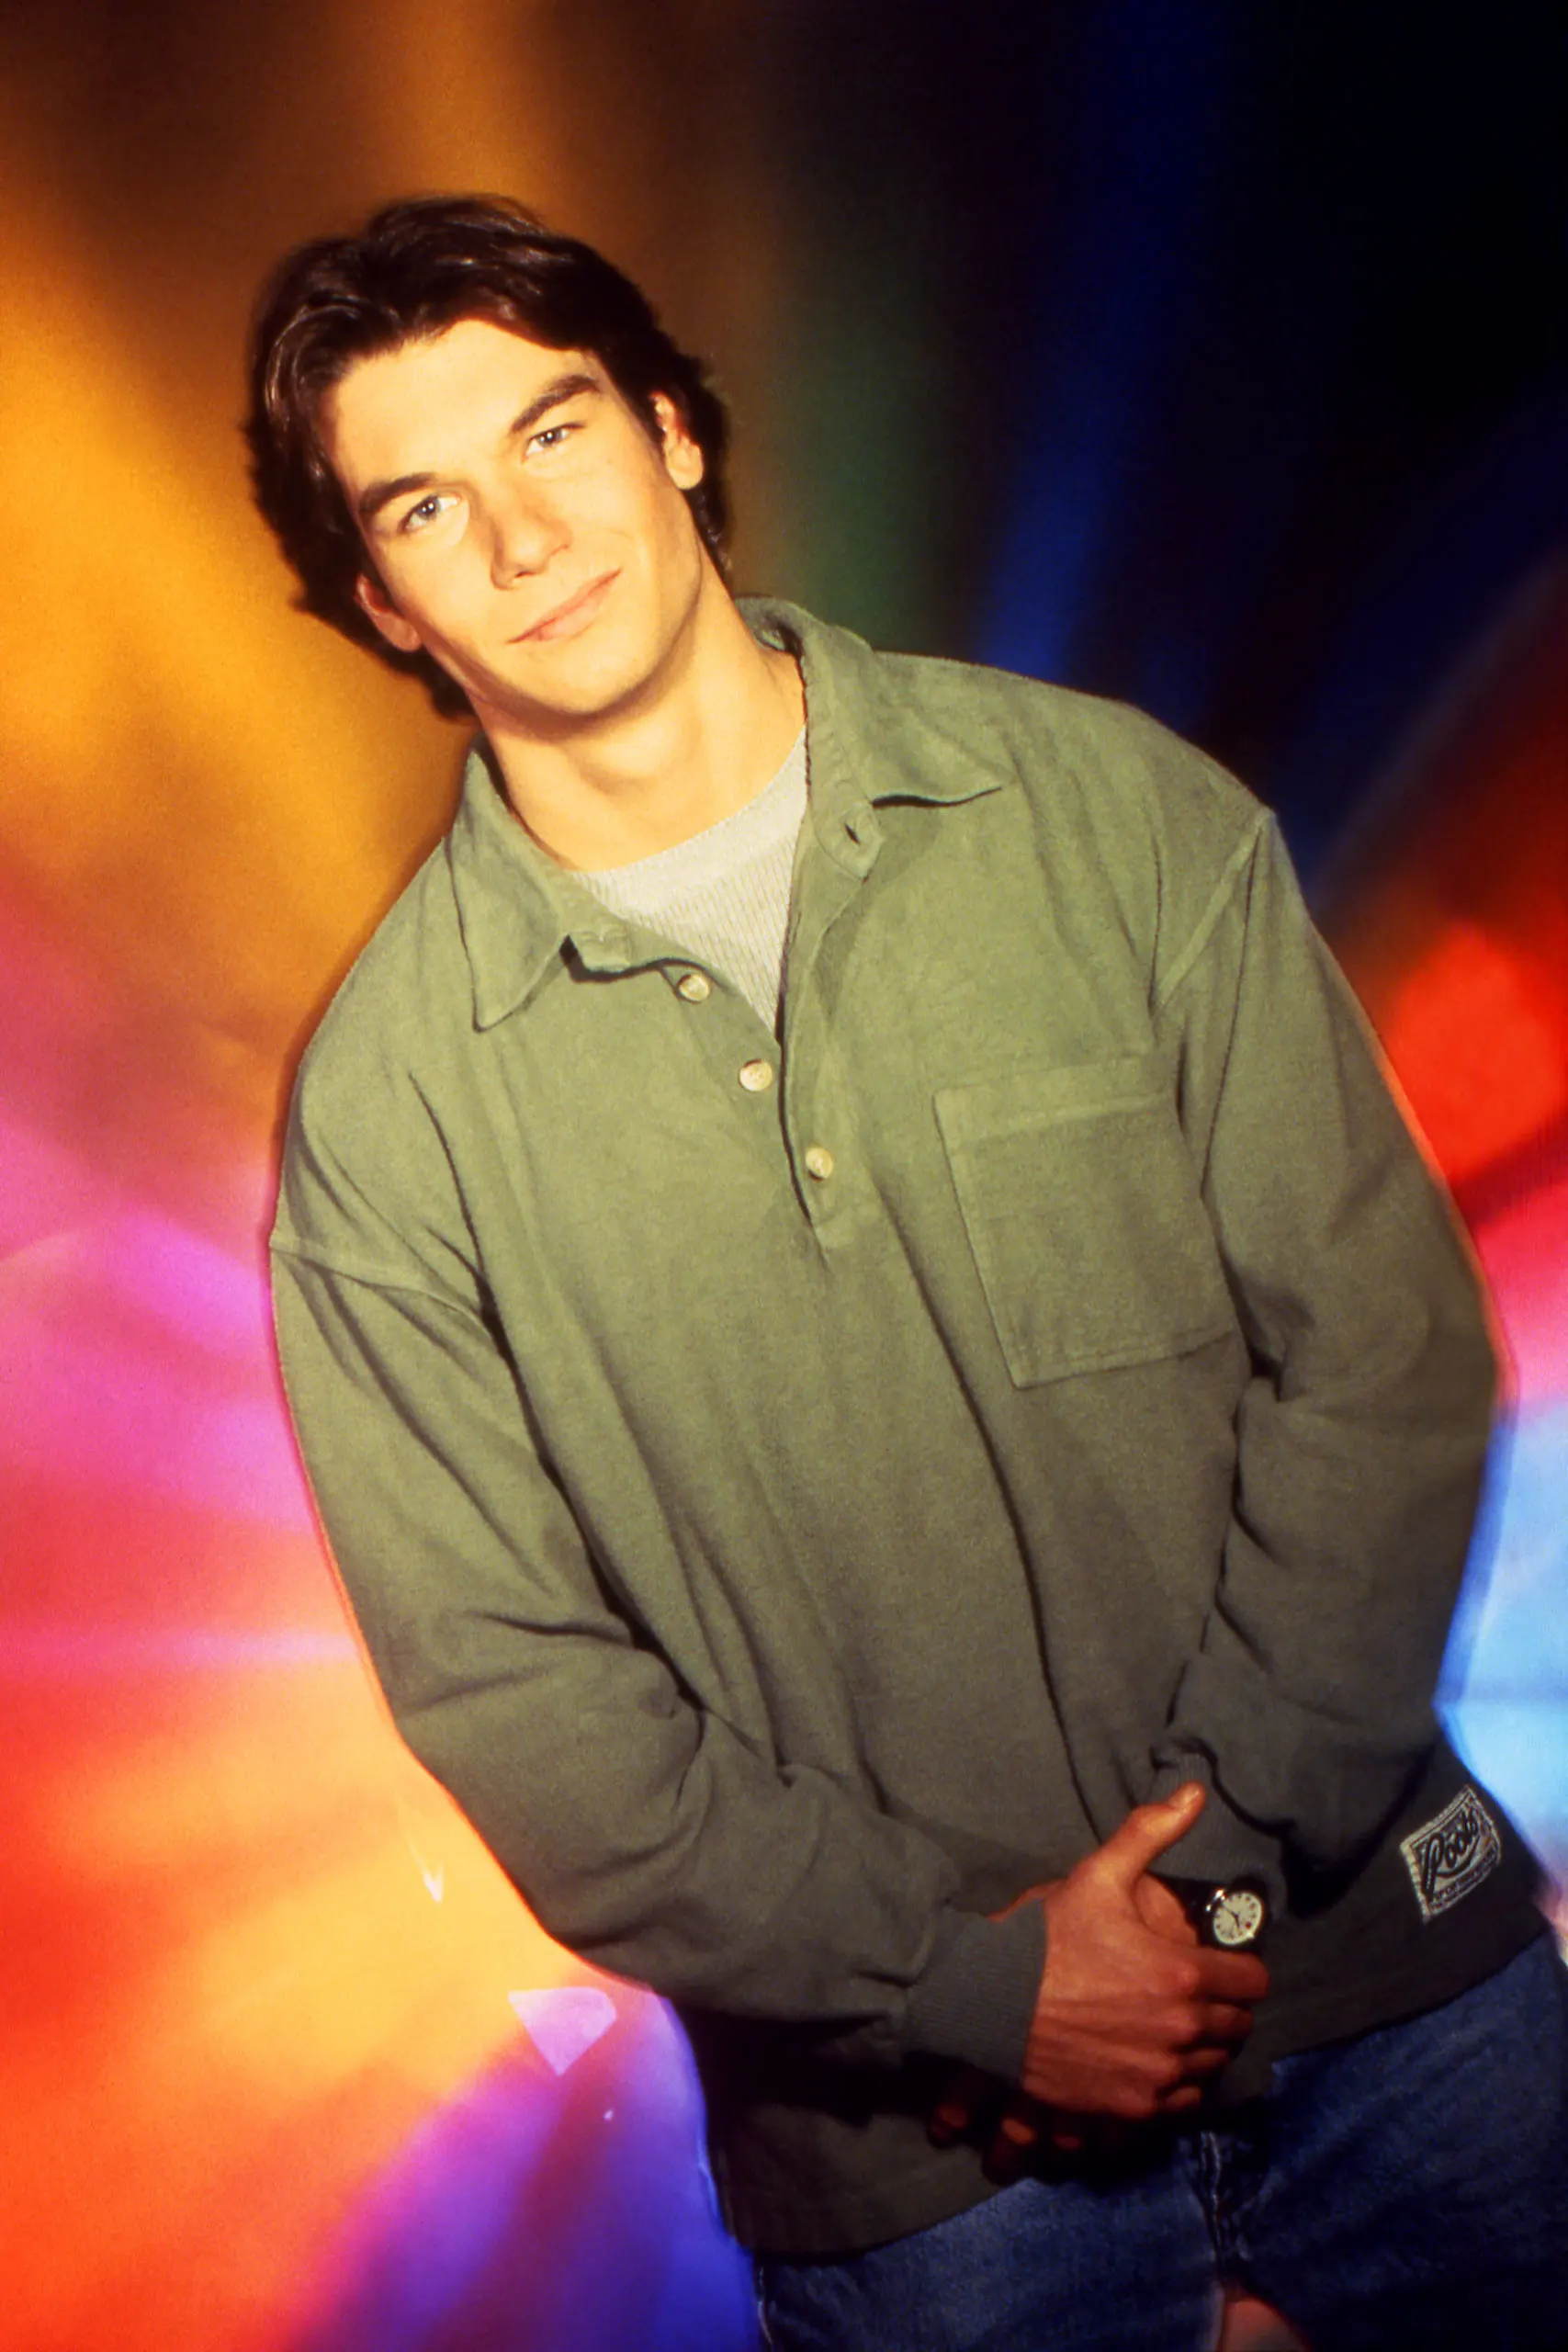 Jerry O'Connell as Quinn Mallory standing in front of a prism color background